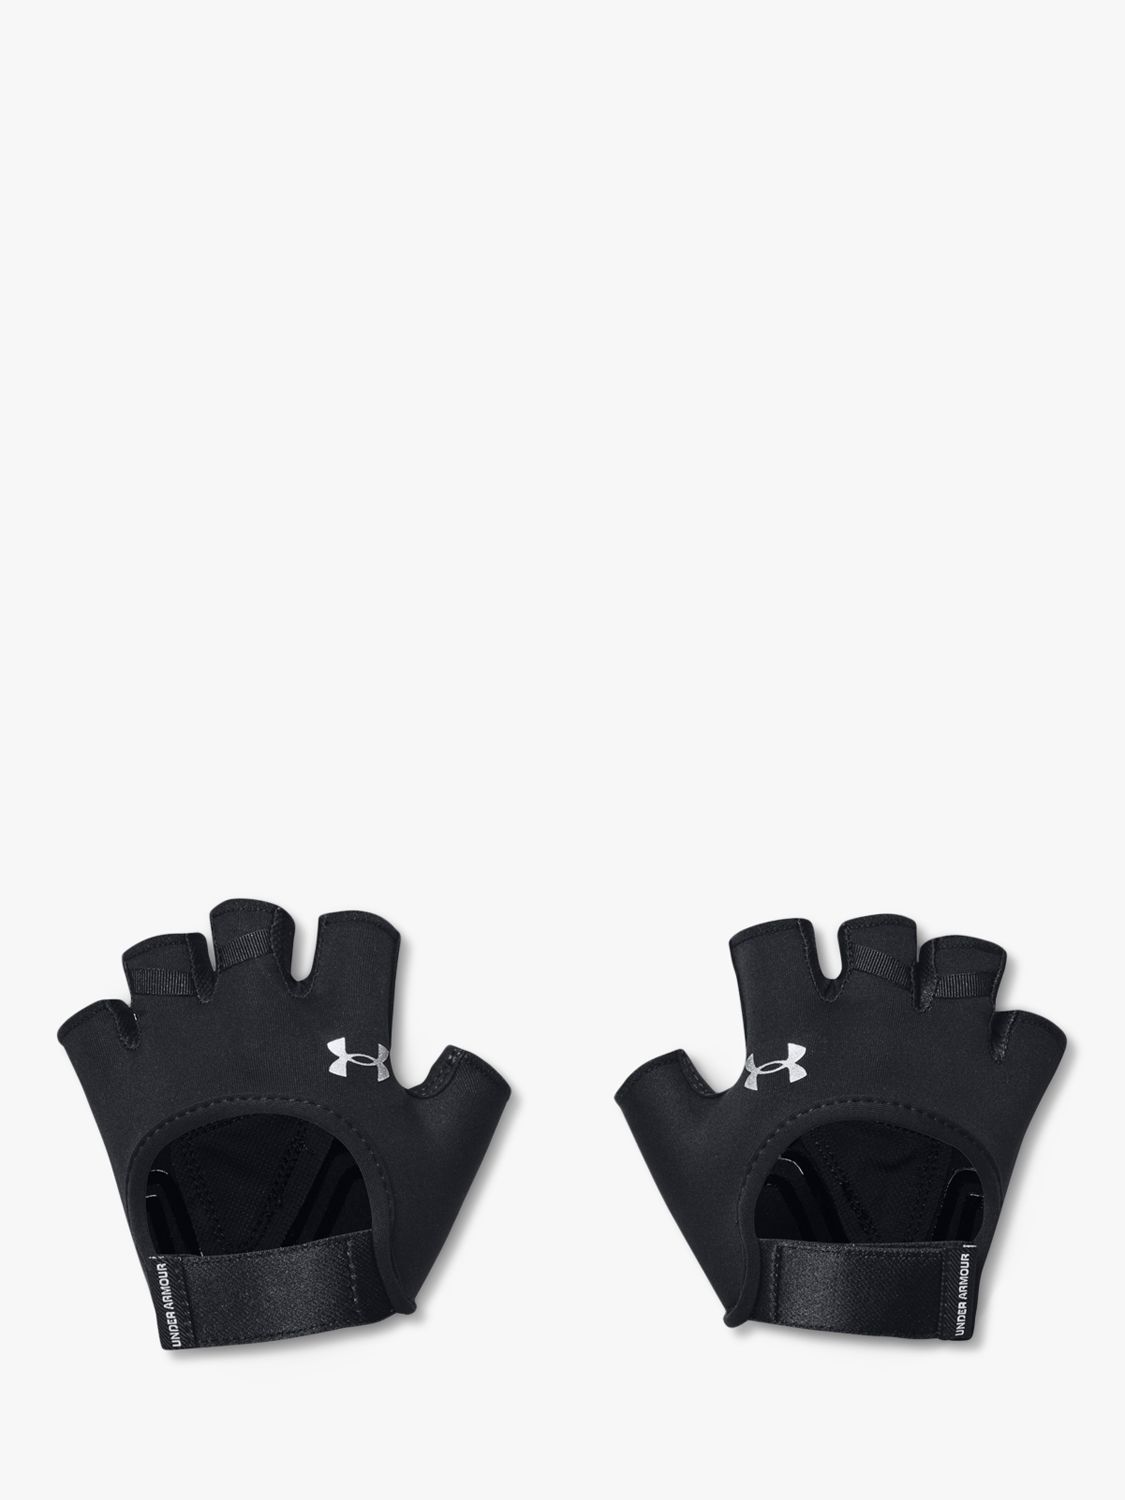 Under Armour Women's Gym Gloves at John Lewis & Partners